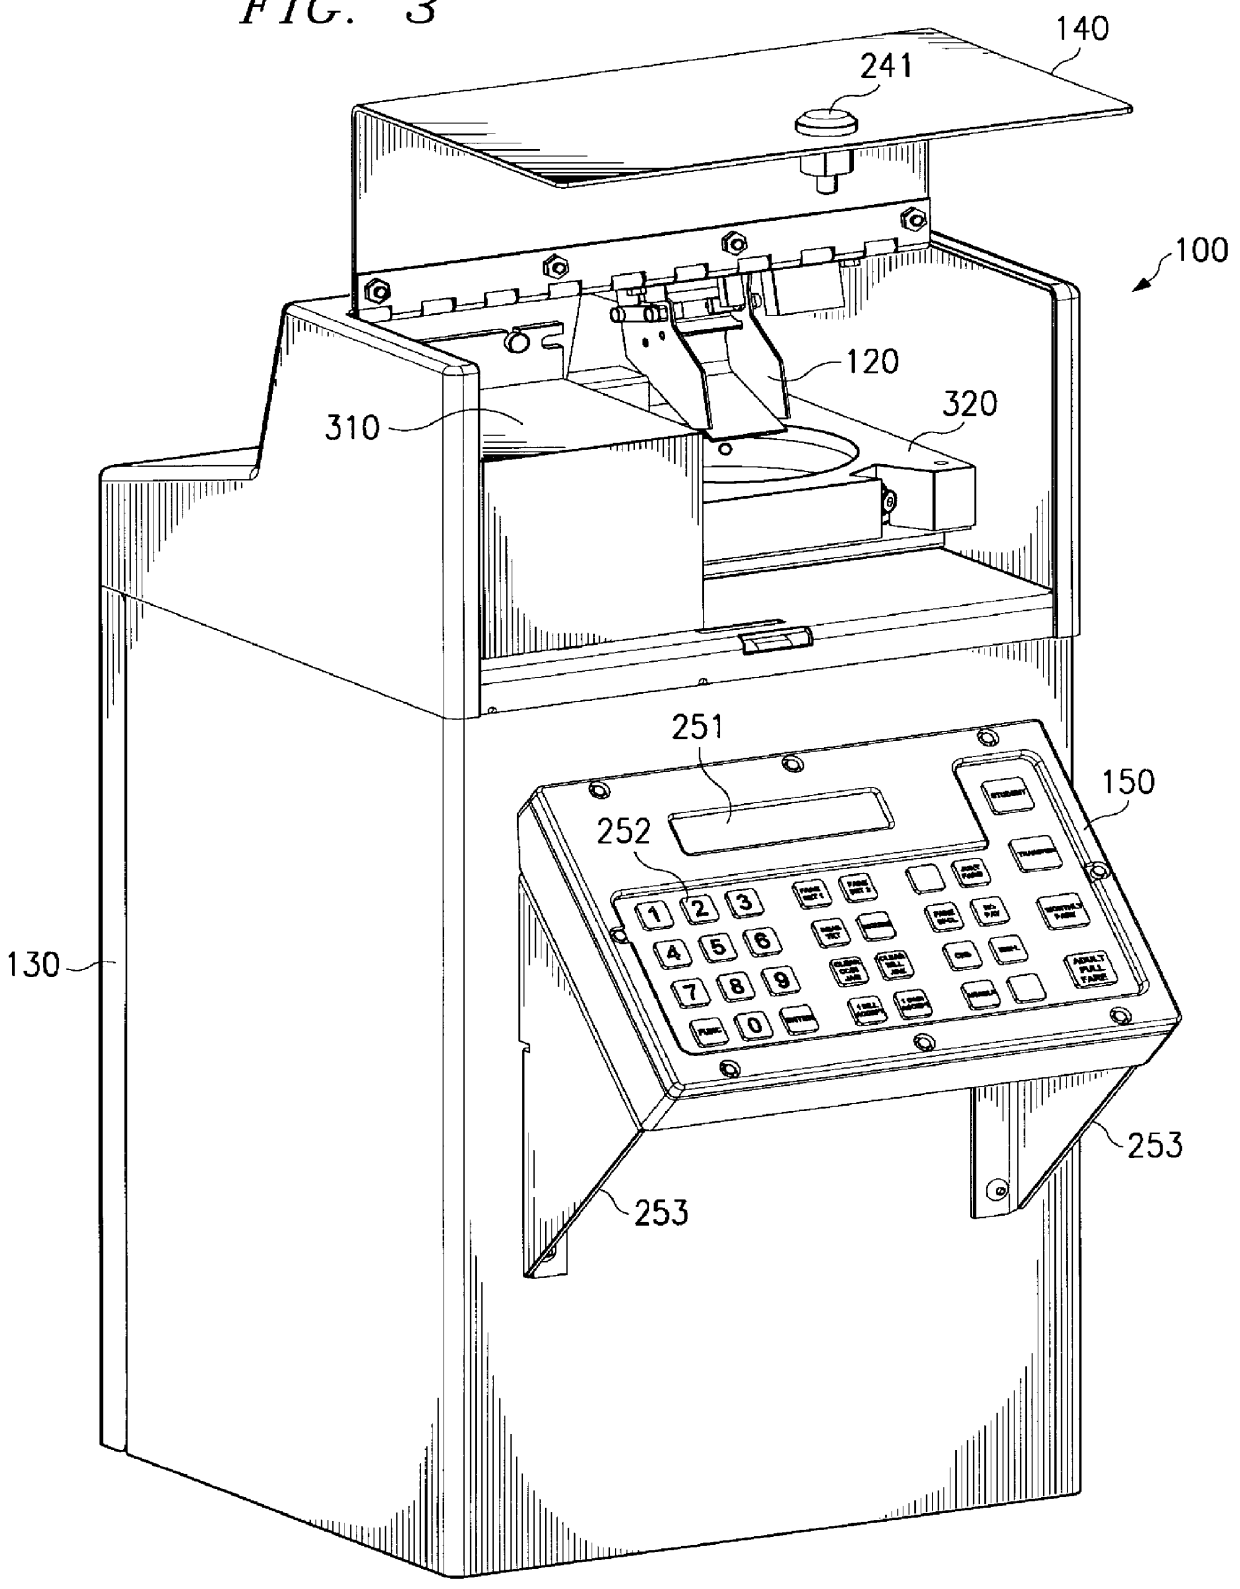 Automatic validating farebox system and method